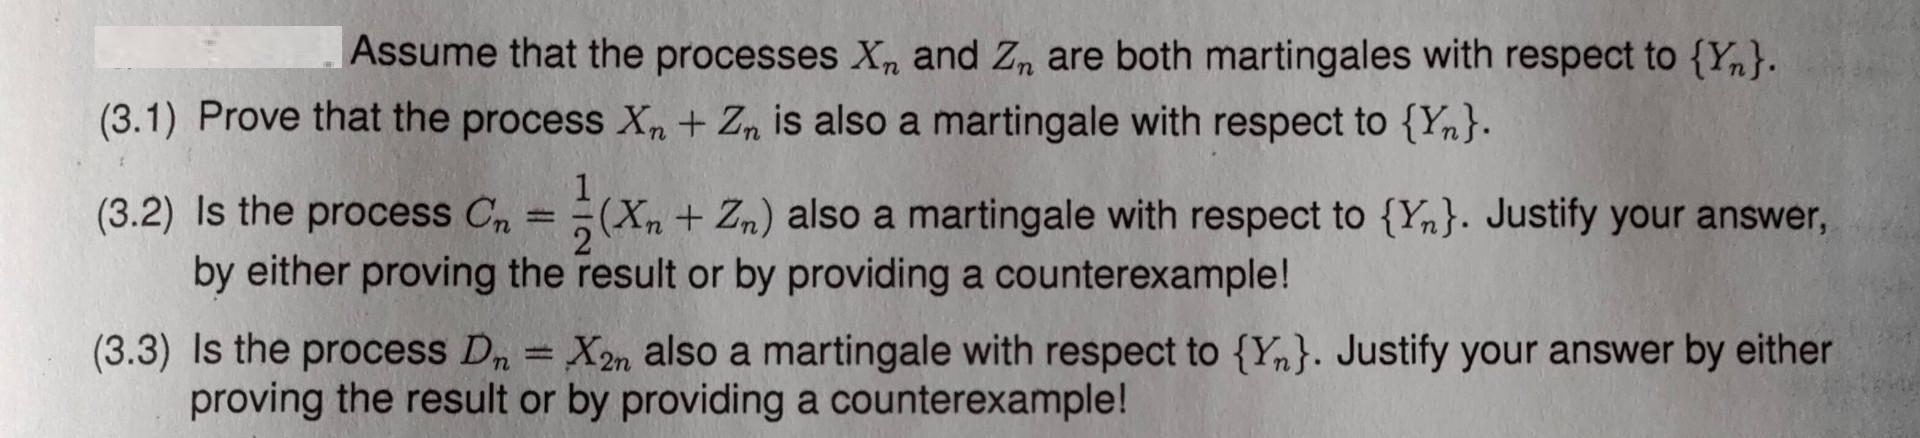 Assume that the processes X and Zn are both martingales with respect to {Y}. (3.1) Prove that the process Xn